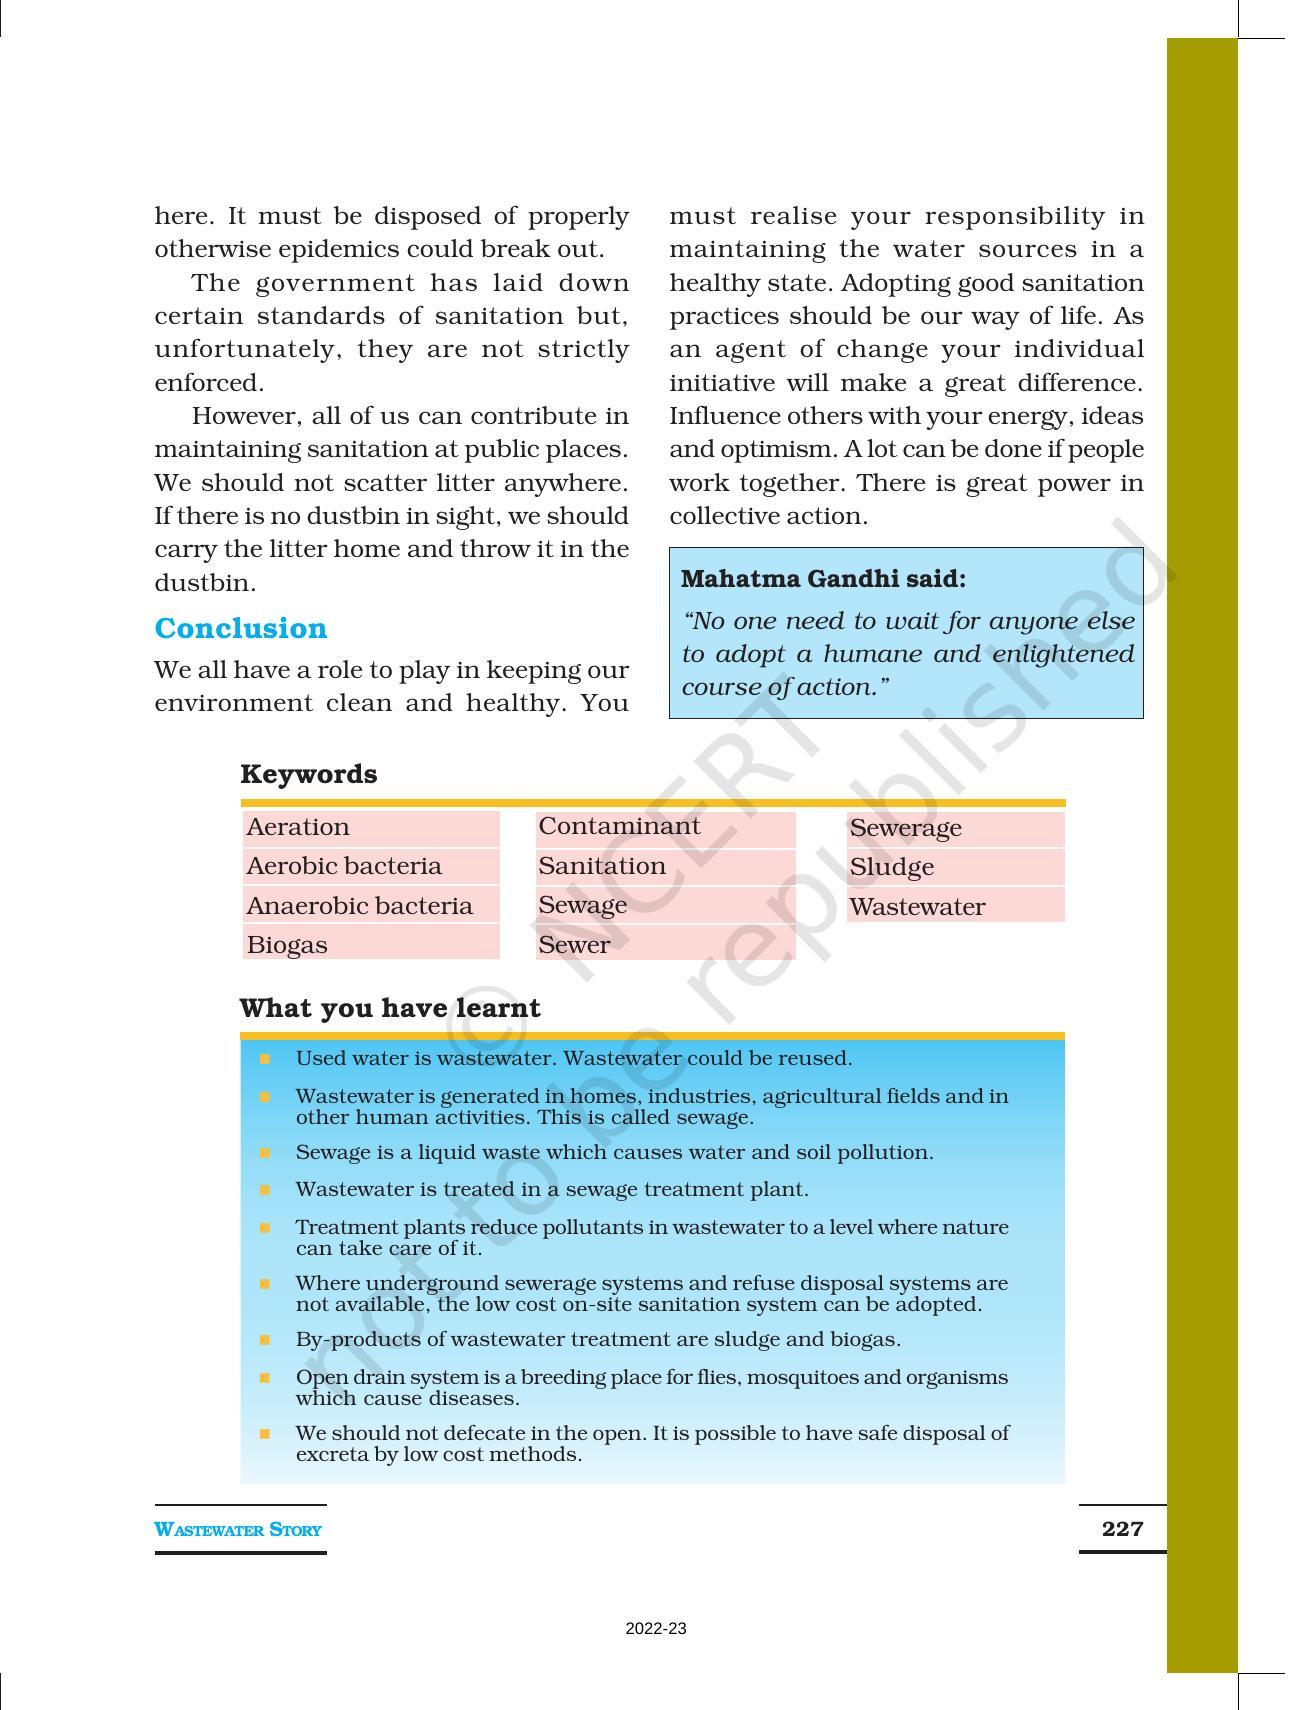 NCERT Book for Class 7 Science: Chapter 18-Wastewater Story - Page 8